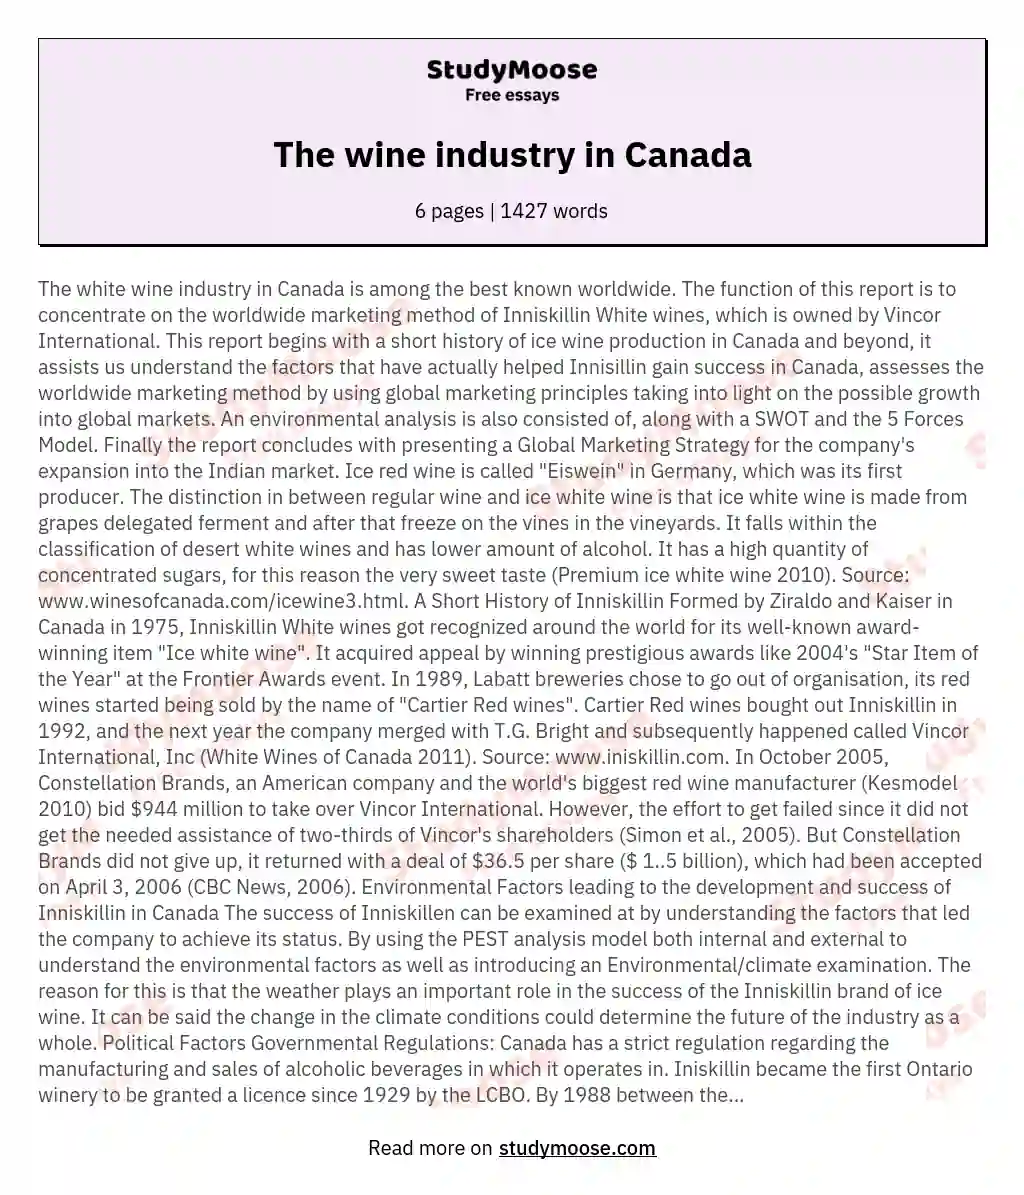 The wine industry in Canada essay